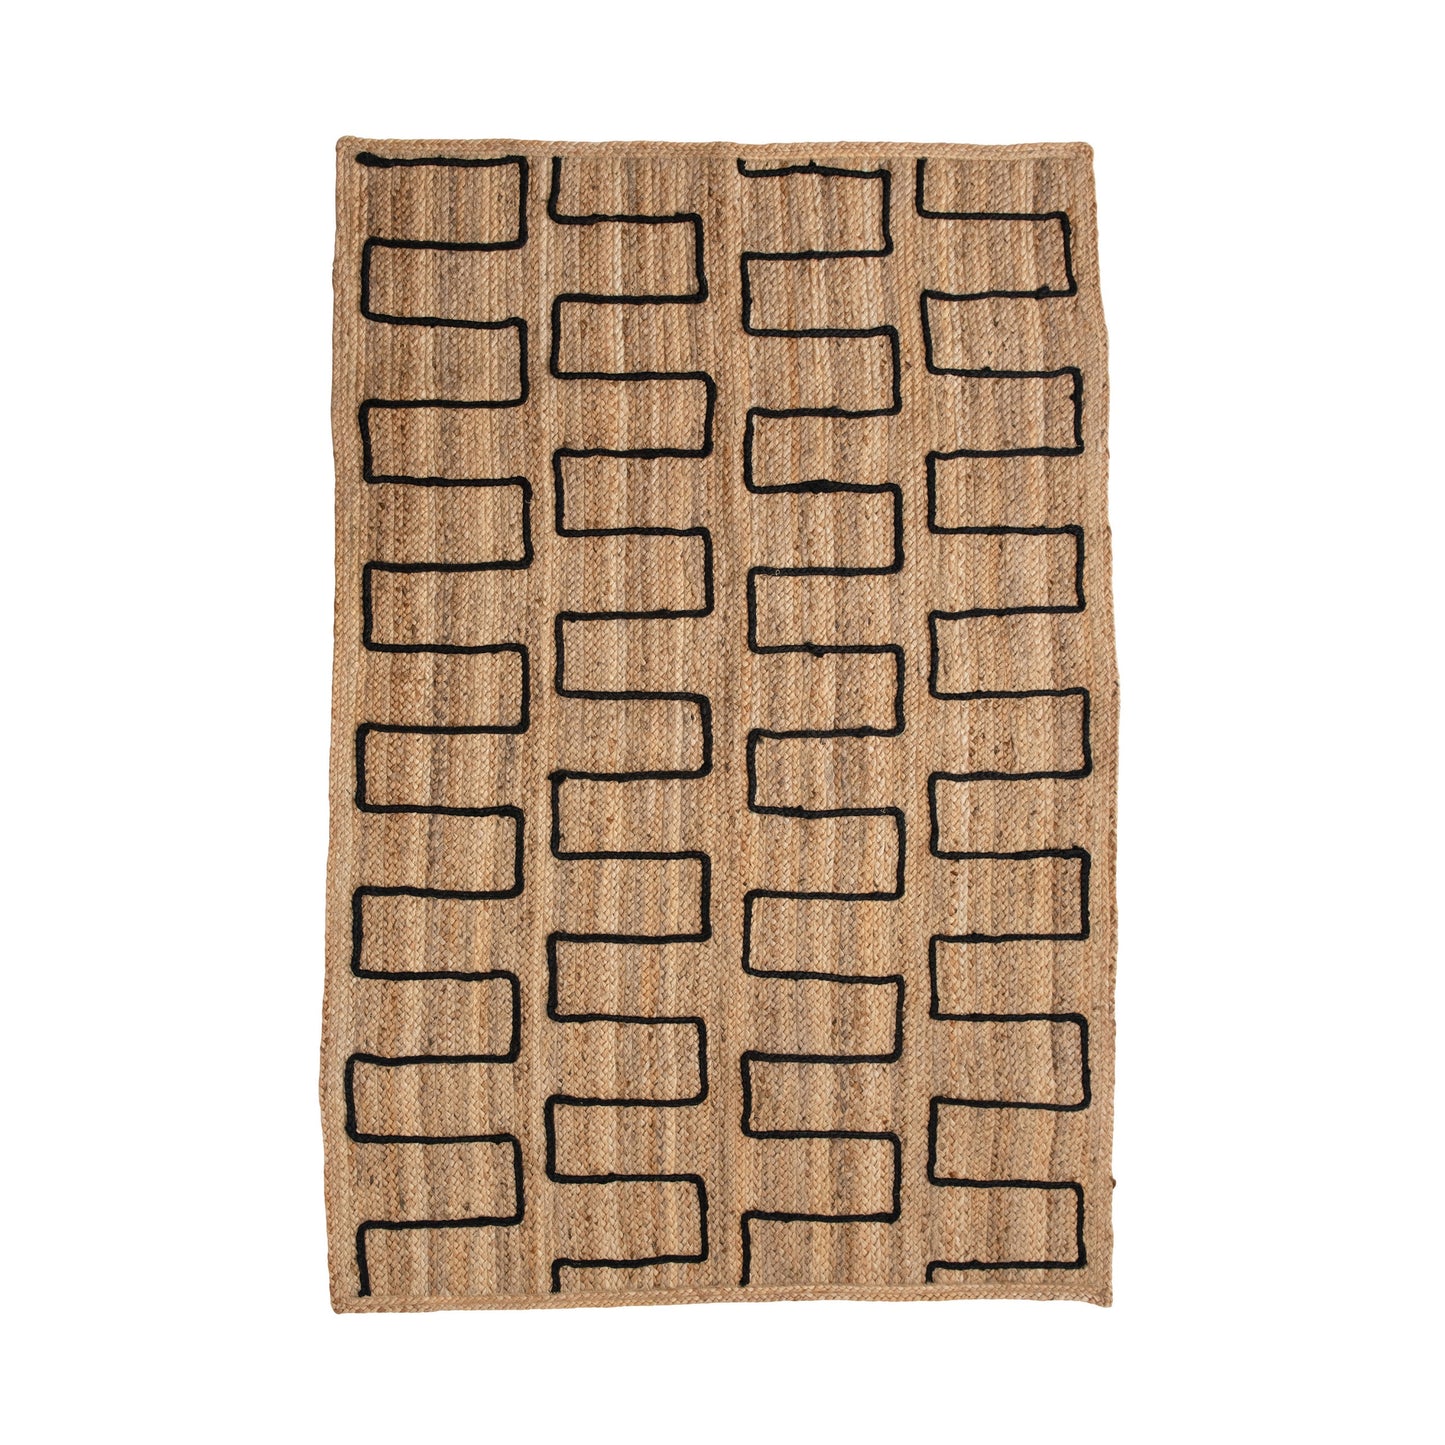 Braided Jute Rug With Stitched Design